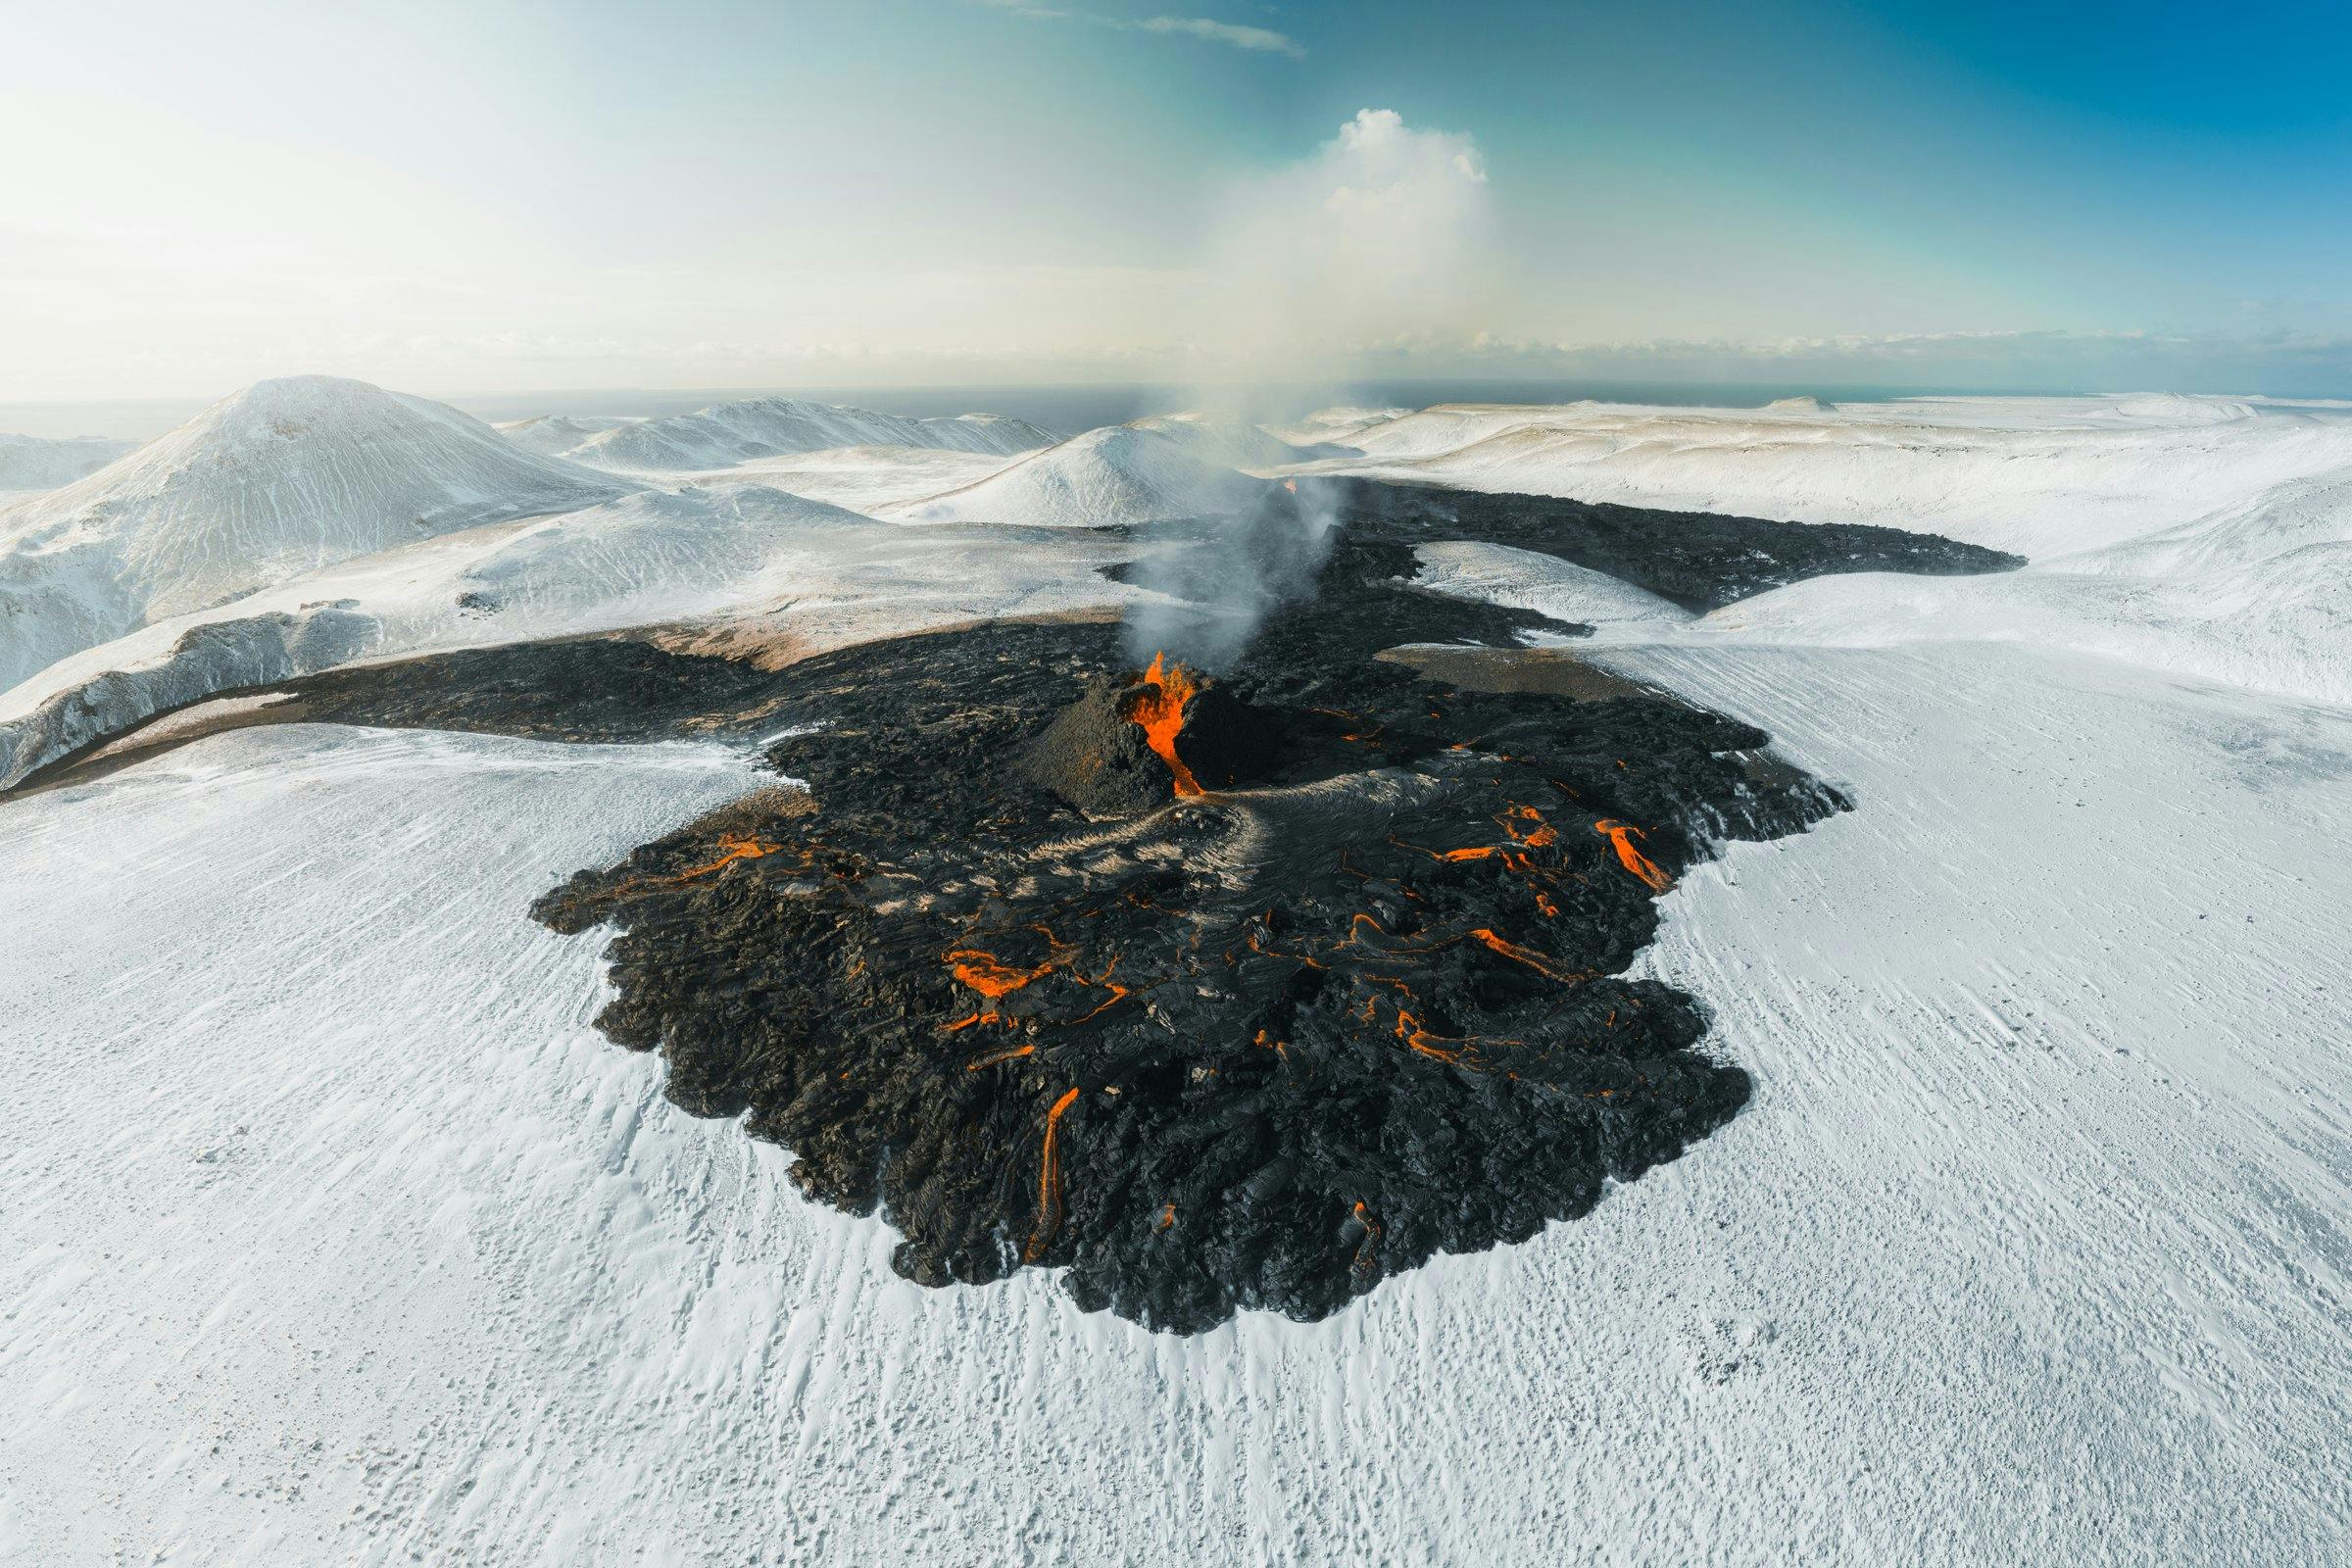 Erupting craters and a partly glowing black field flowing on a snowy surface